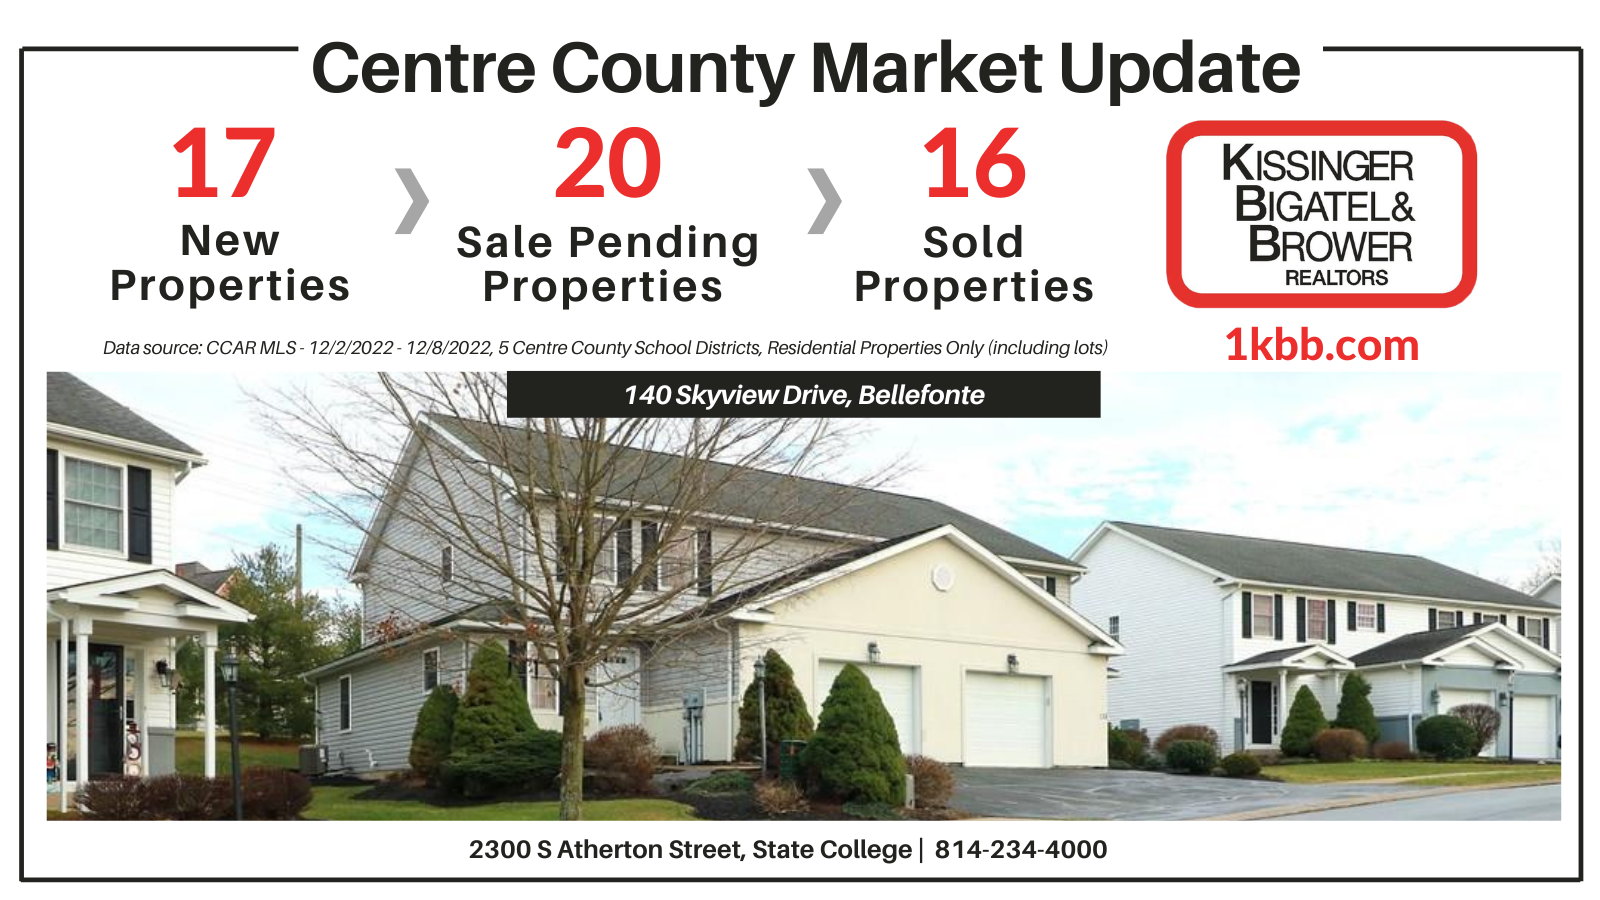 Market Update Report for 12/2-12/8/2022 in Centre County, PA